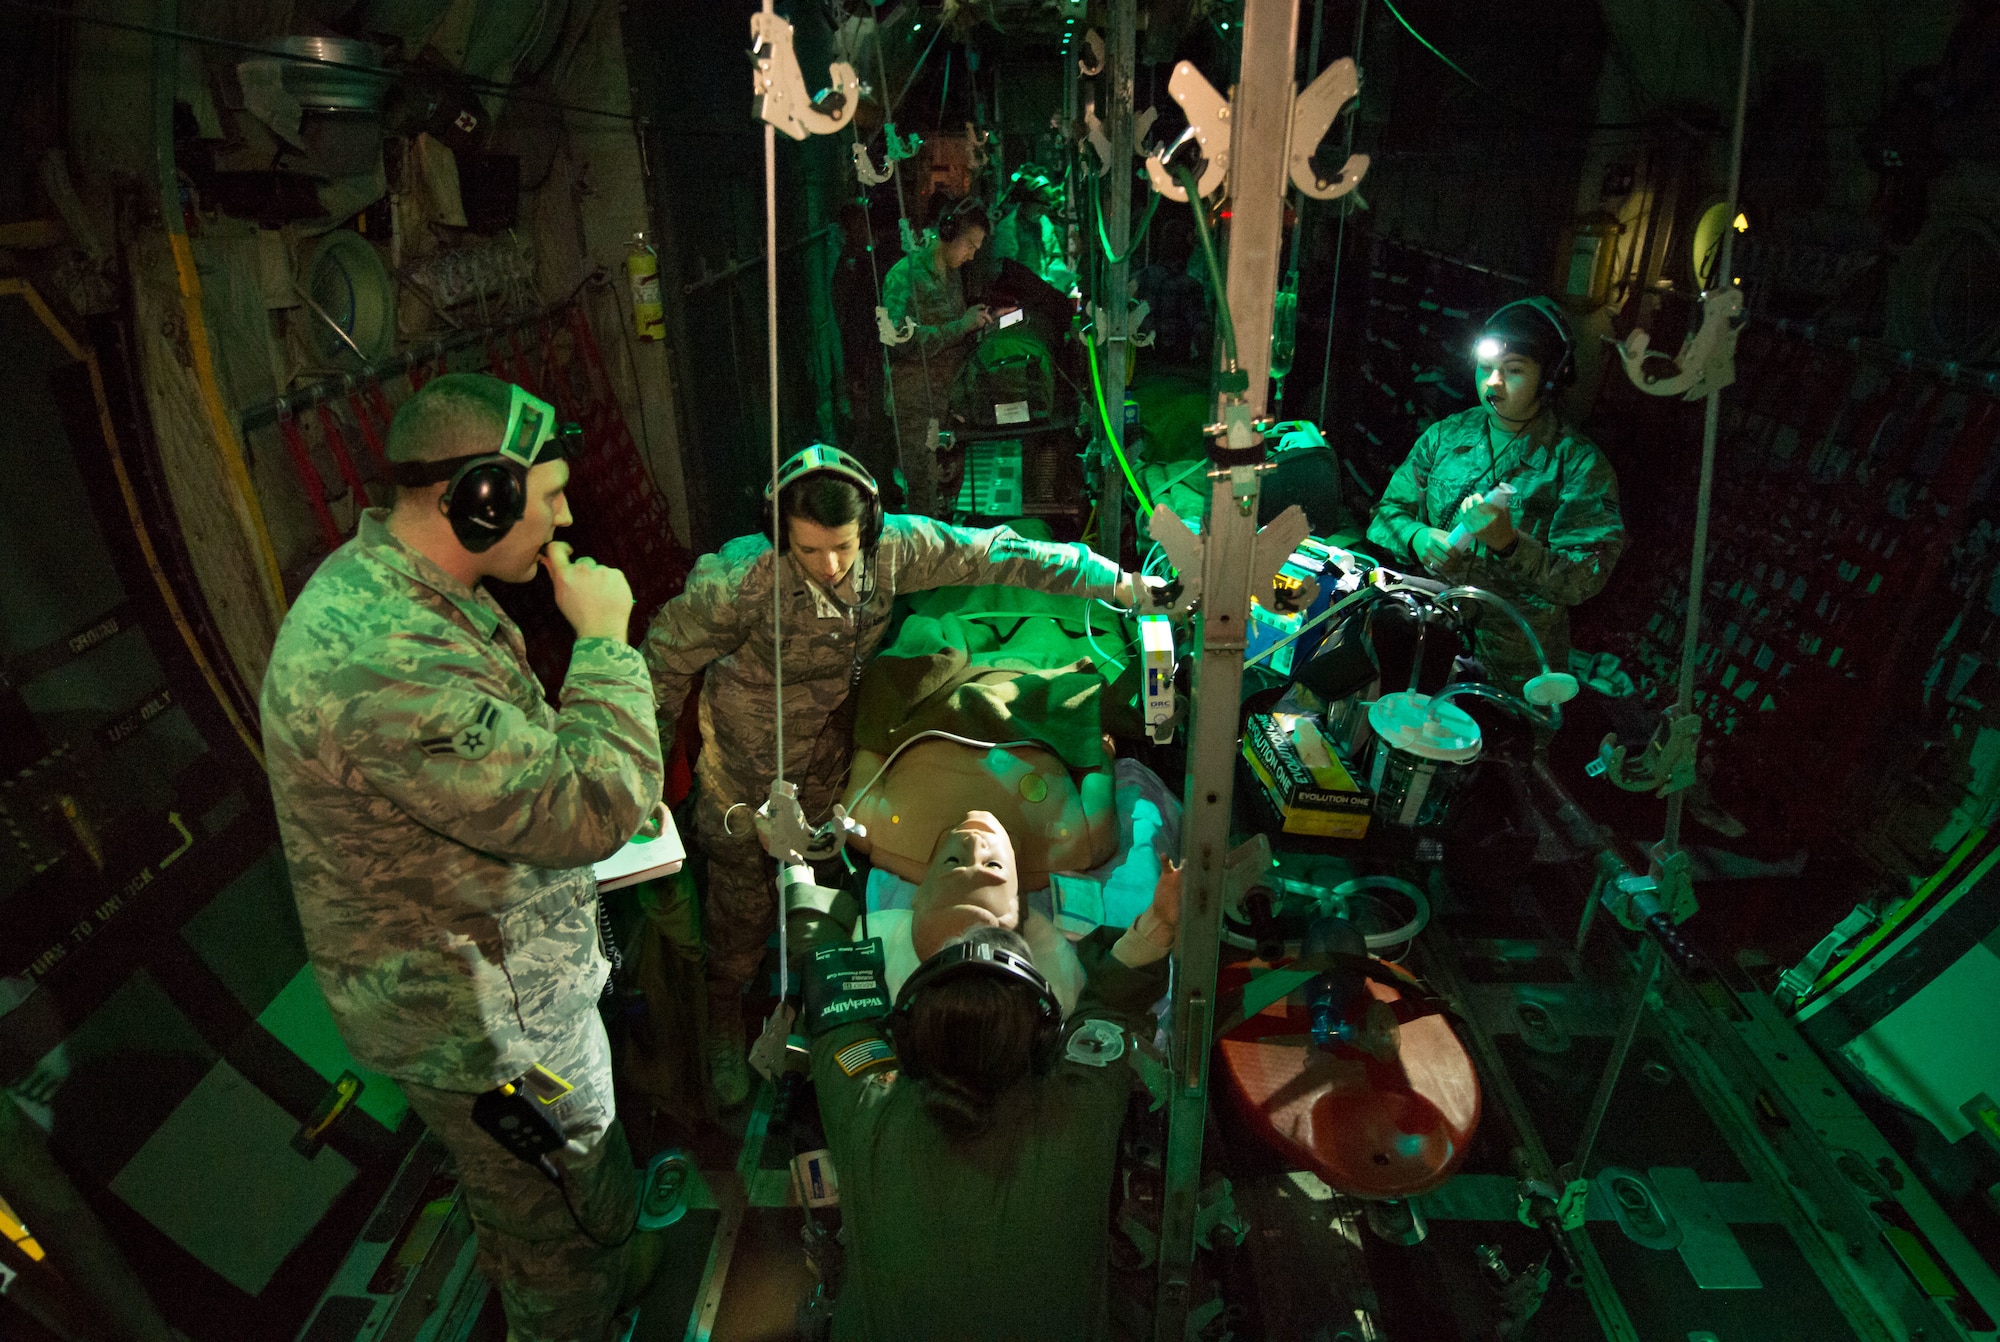 Flight Nurse and Aeromedical Technician Course students care for a simulated patient during a simulated Aeromedical Evacuation mission aboard a C-130 mockup at the 711th Human Performance Wing's U.S. Air Force School of Aerospace Medicine at Wright Patterson AFB, Ohio, Jan. 29, 2018. (U.S. Air Force photo by J.M. Eddins Jr.)